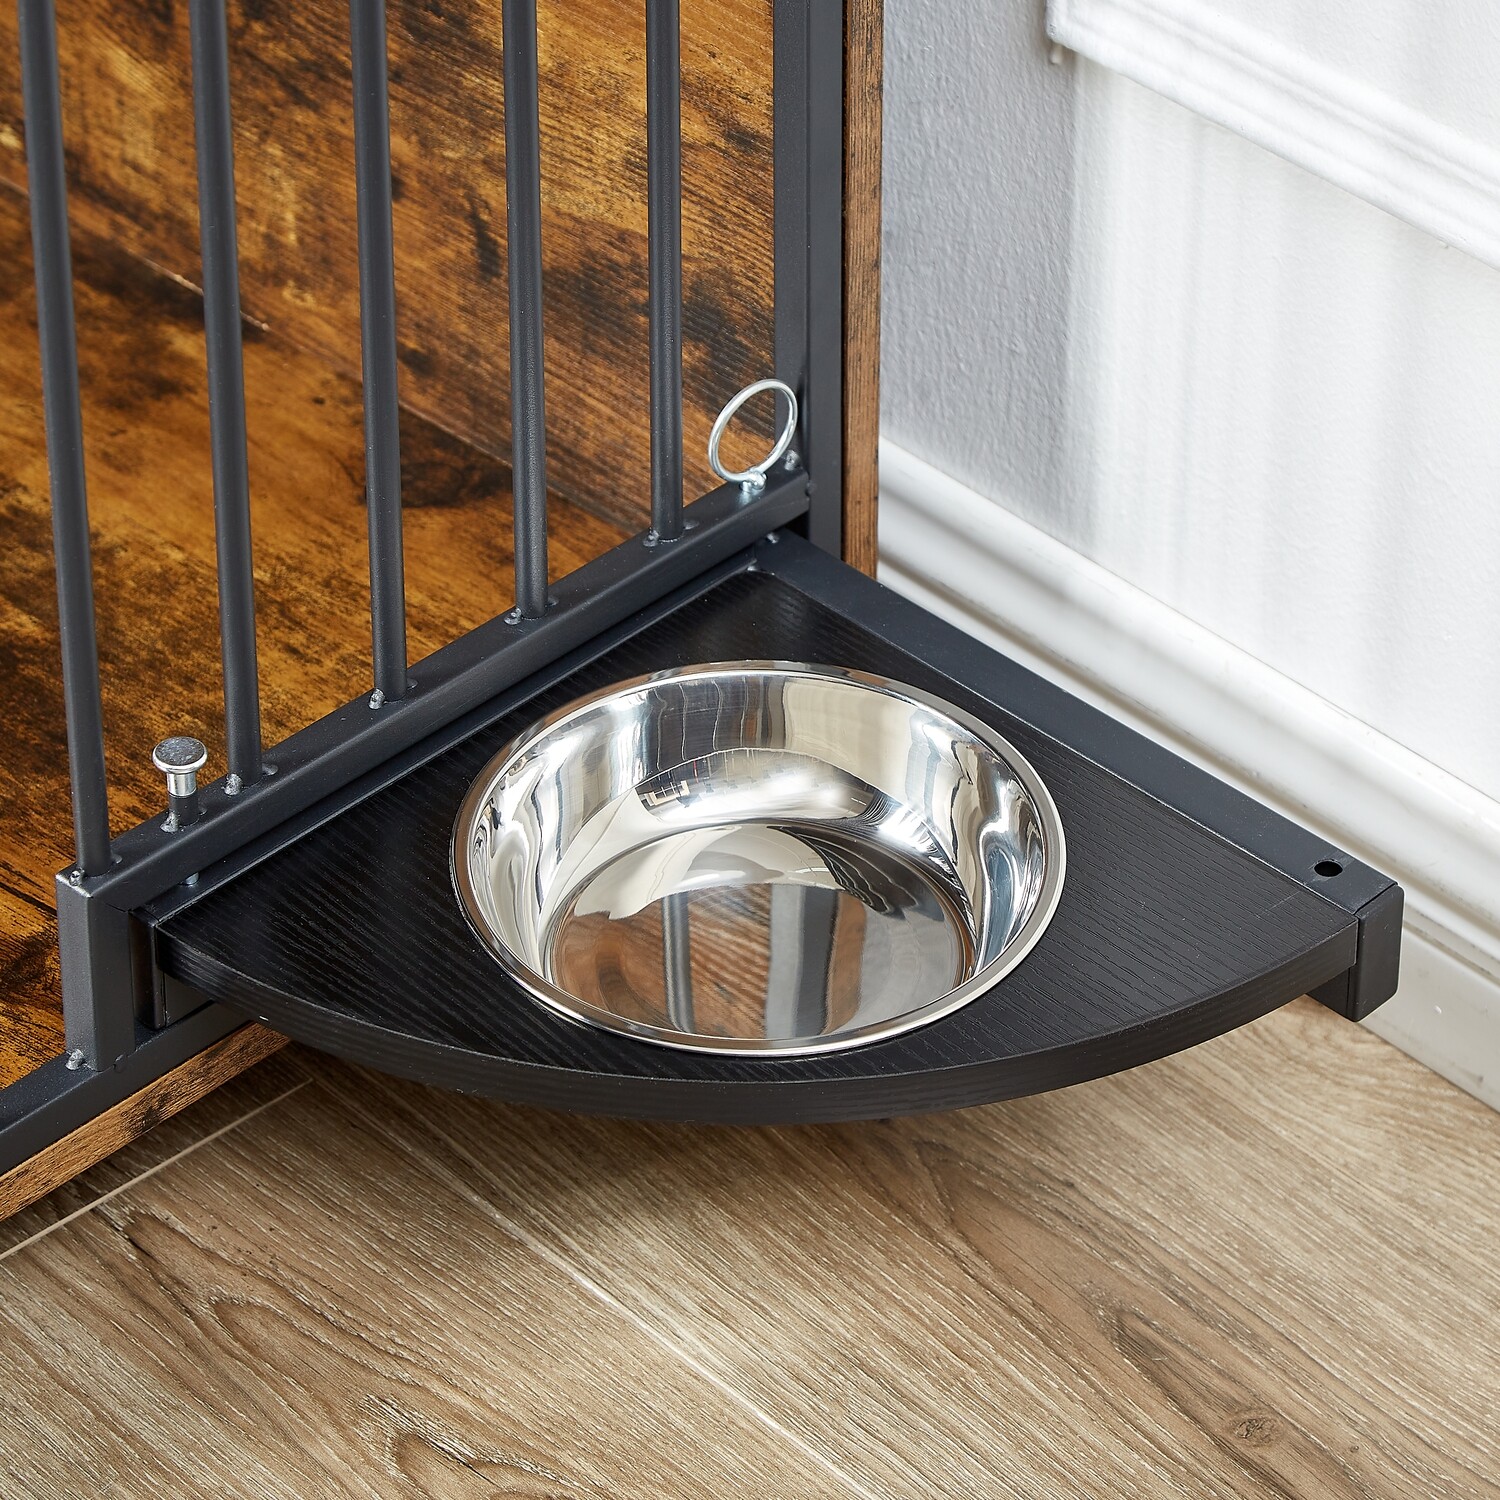 Furniture Style Dog Crate Side Table With Rotatable Feeding Bowl, Wheels, Three Doors, Flip-Up Top Opening, Indoor.